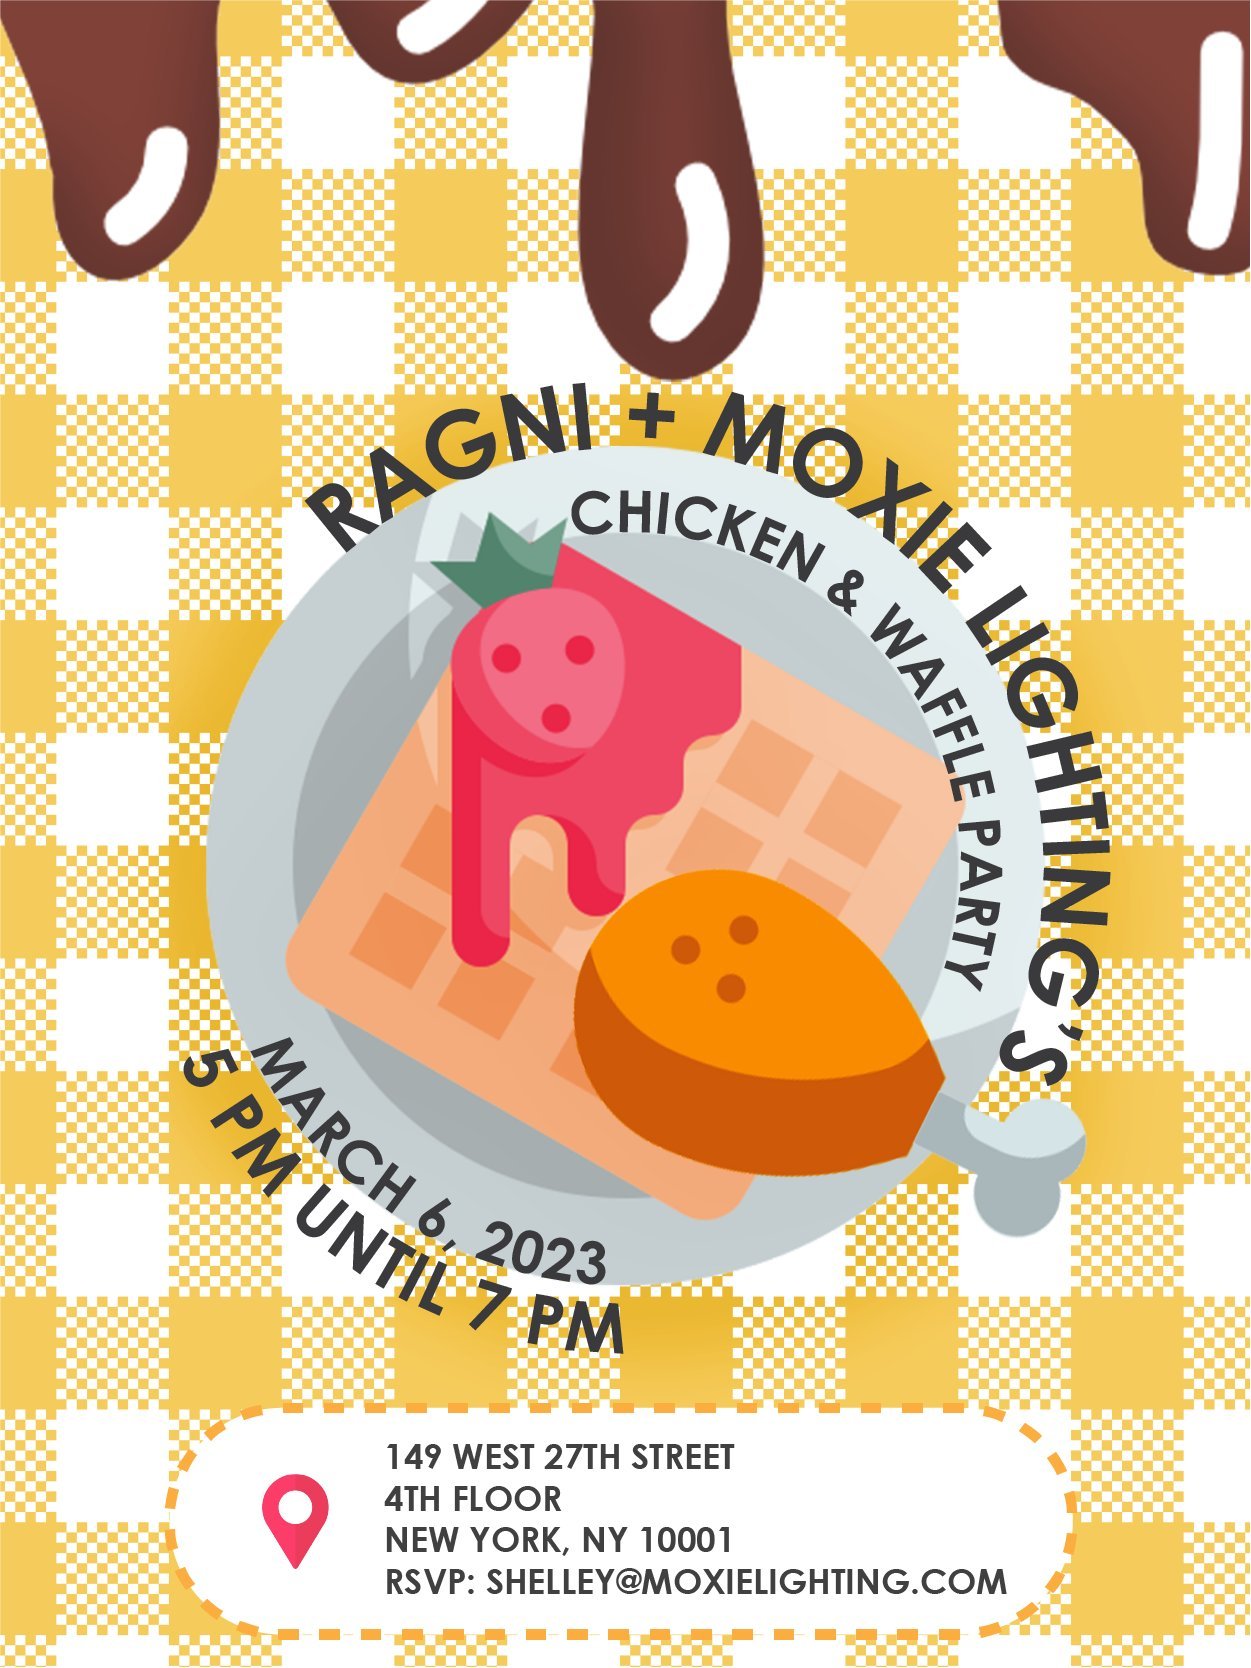 You're invited to @ragnilighting + Moxie Lighting's Chicken and Waffle Party!

Come join us for a delicious dinner of comfort food. We'll be serving up hot crispy waffles with a variety of toppings, fried chicken, and all the fixings.

Let's get toge